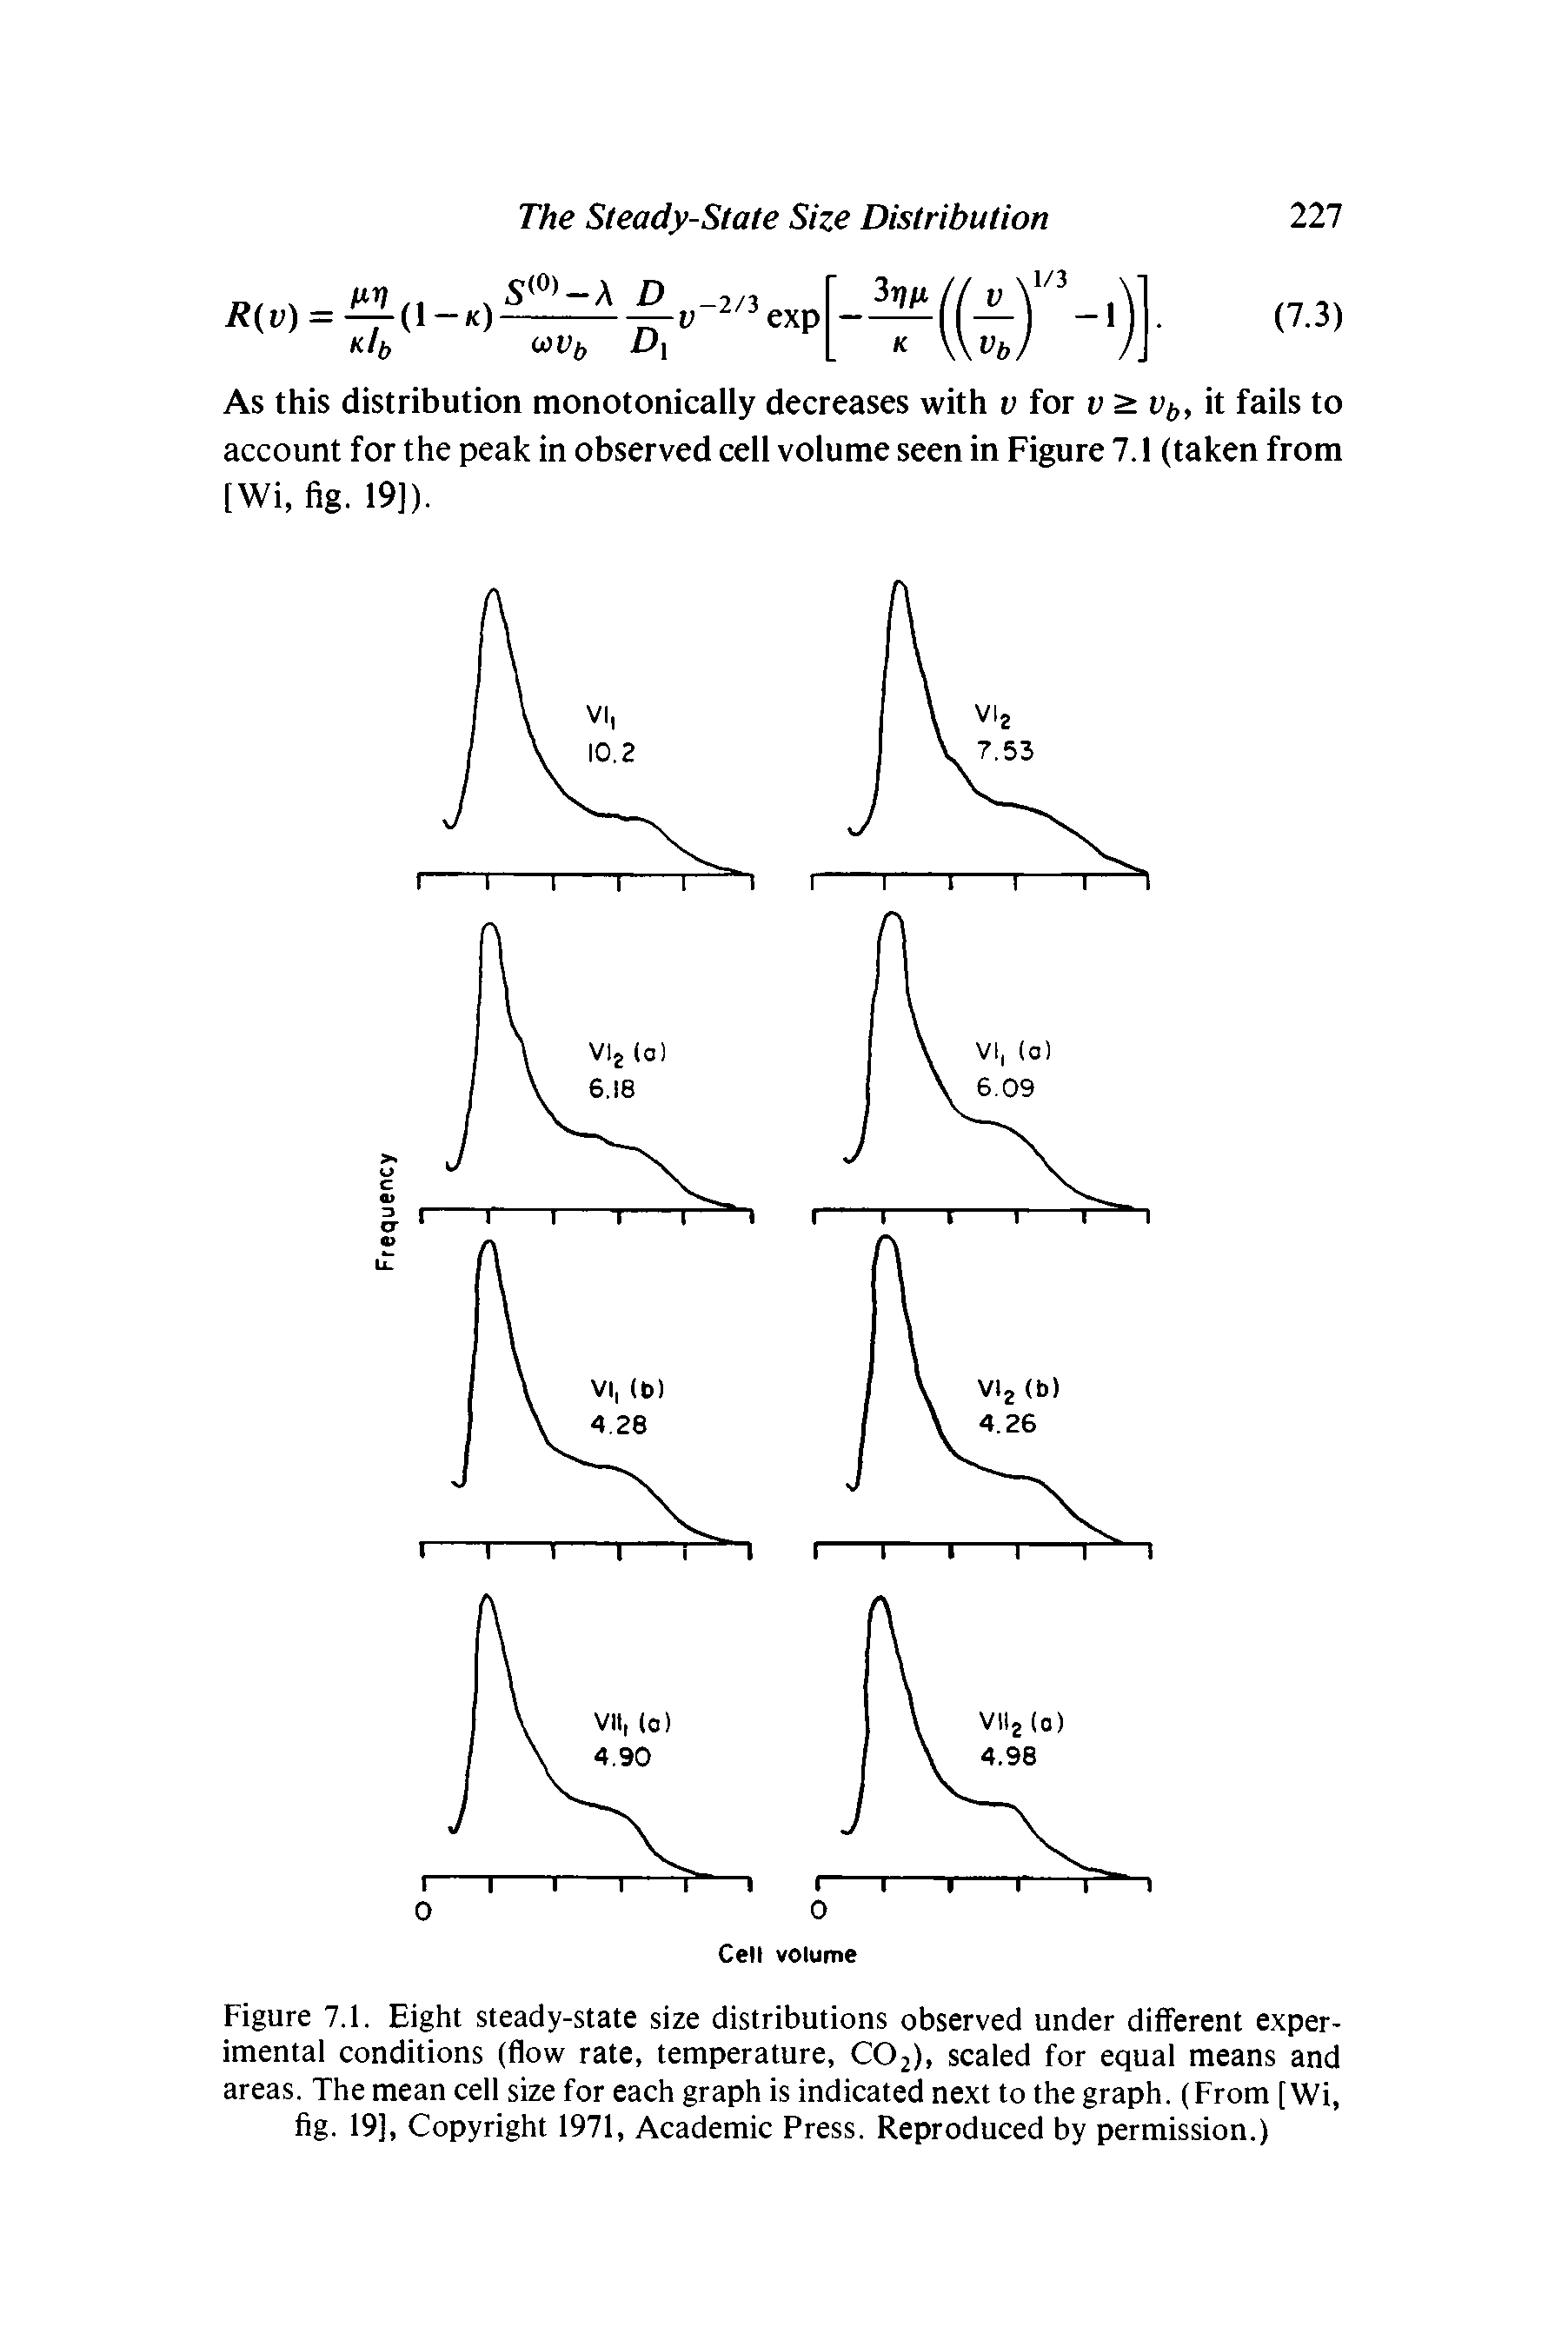 Figure 7.1. Eight steady-state size distributions observed under different experimental conditions (flow rate, temperature, CO2), scaled for equal means and areas. The mean cell size for each graph is indicated next to the graph. (From [Wi, fig. 19], Copyright 1971, Academic Press. Reproduced by permission.)...